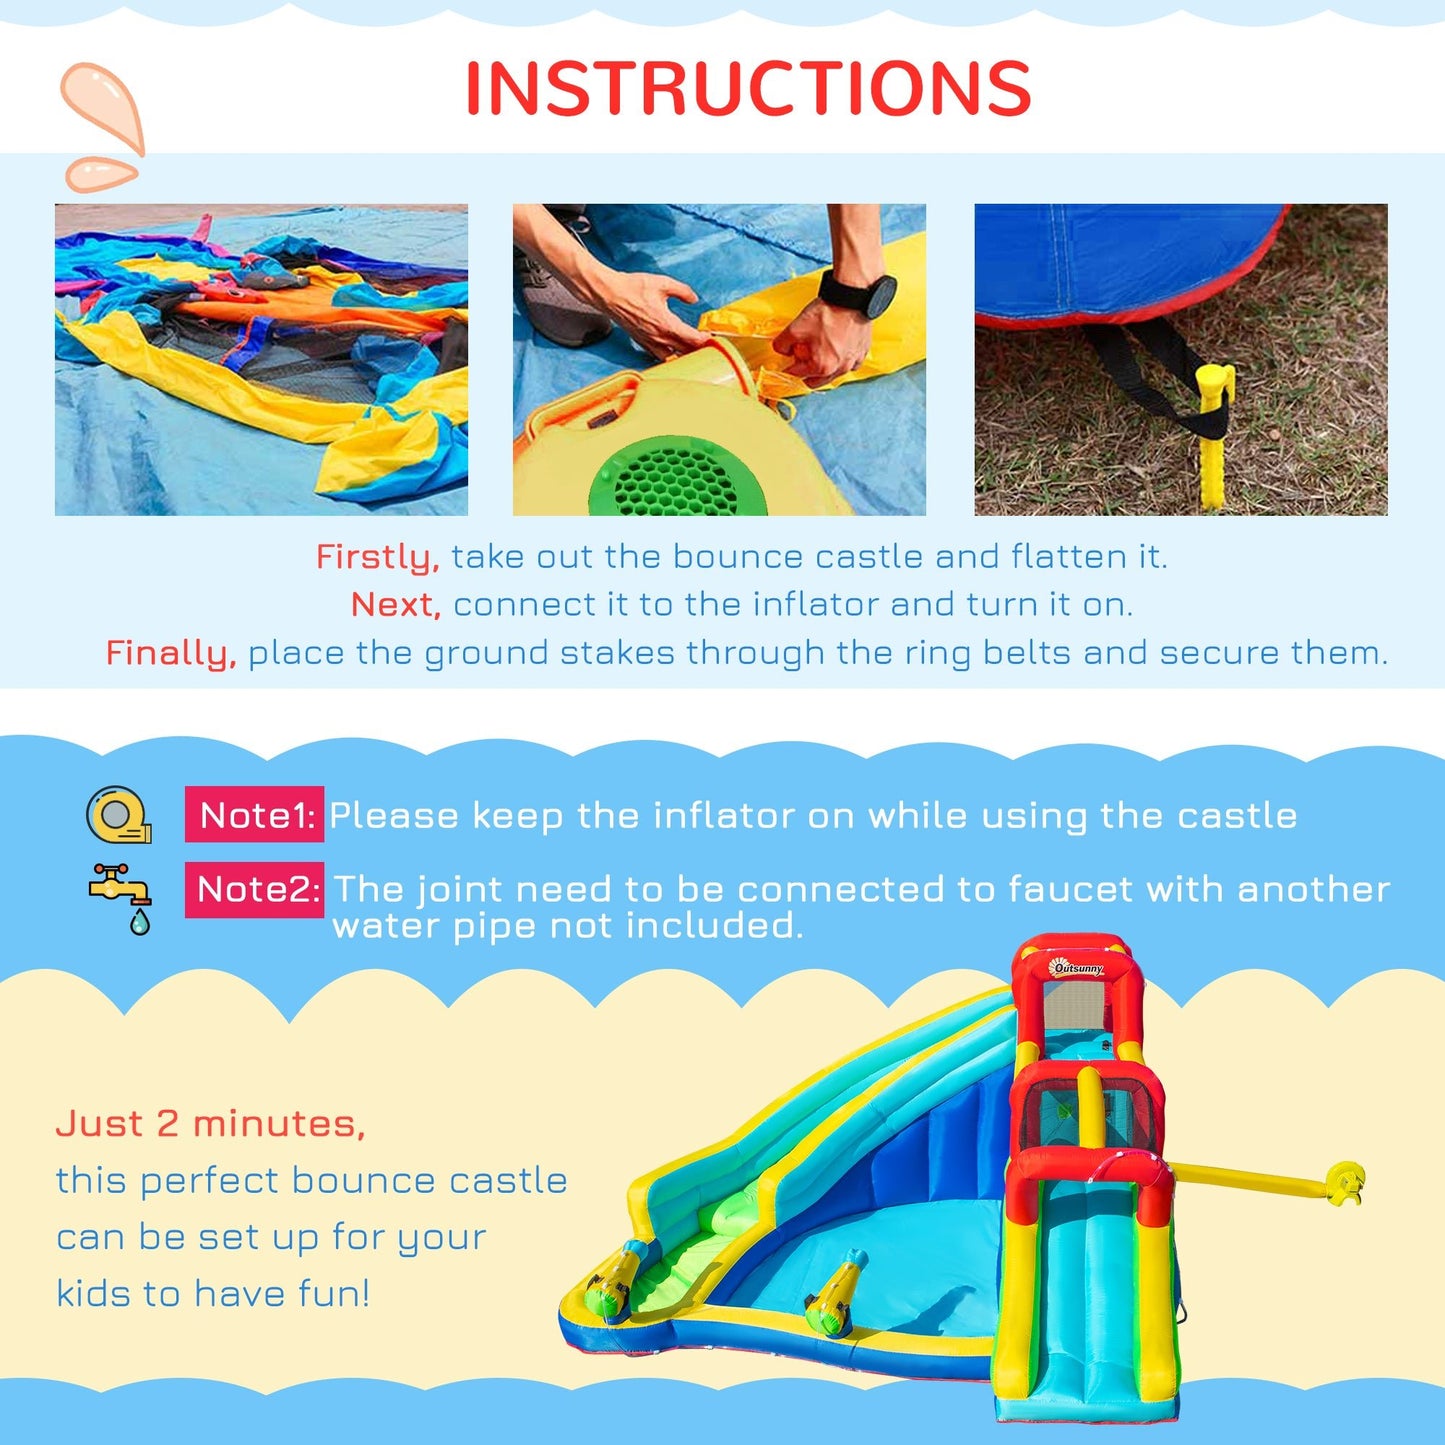 Miscellaneous-5-in-1 Inflatable Water Slide Kids Bounce House Water Park Jumping Castle Includes Trampoline Slide Water Pool Climbing Wall, 450W Air Blower - Outdoor Style Company